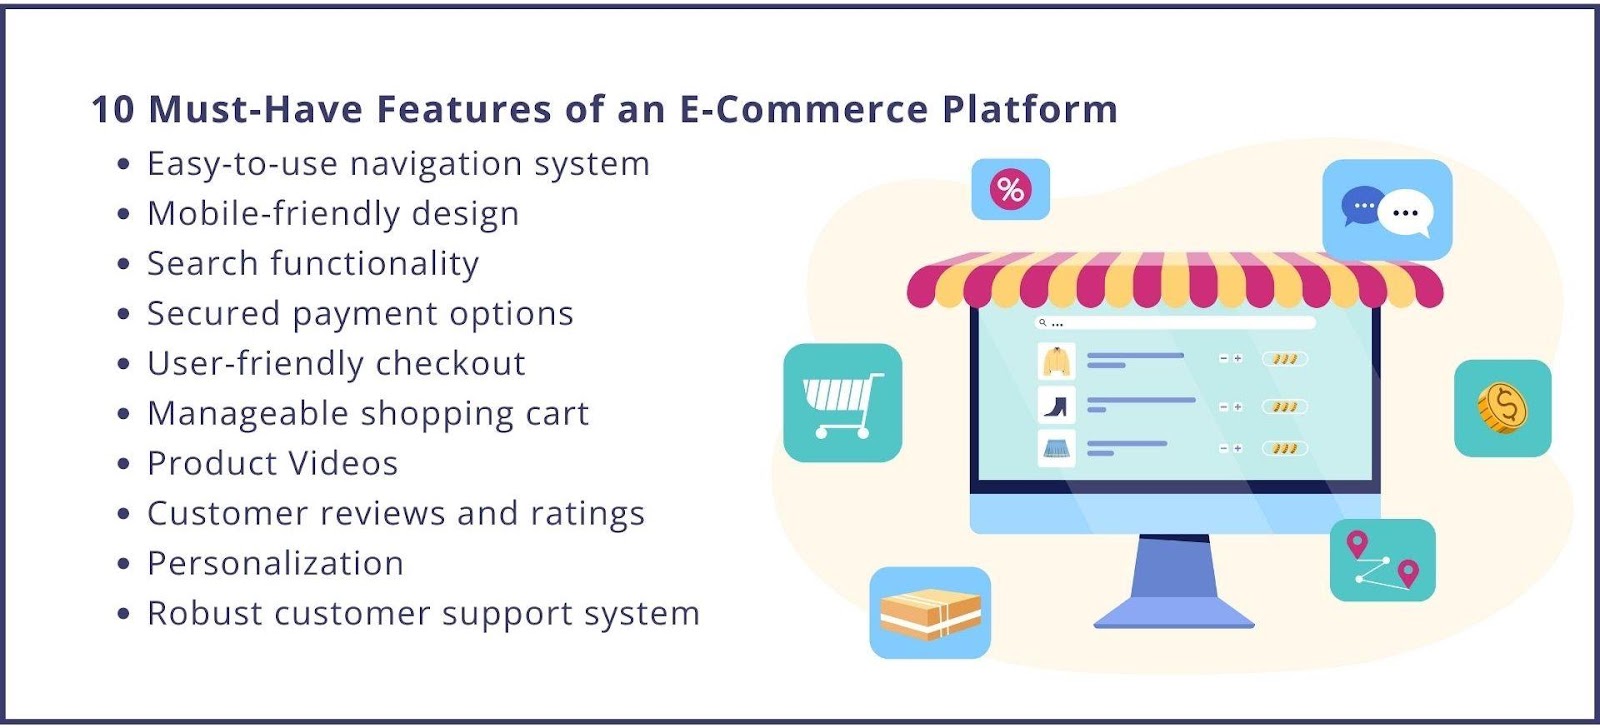 In 2023, every e-commerce platform should offer some basic functions.